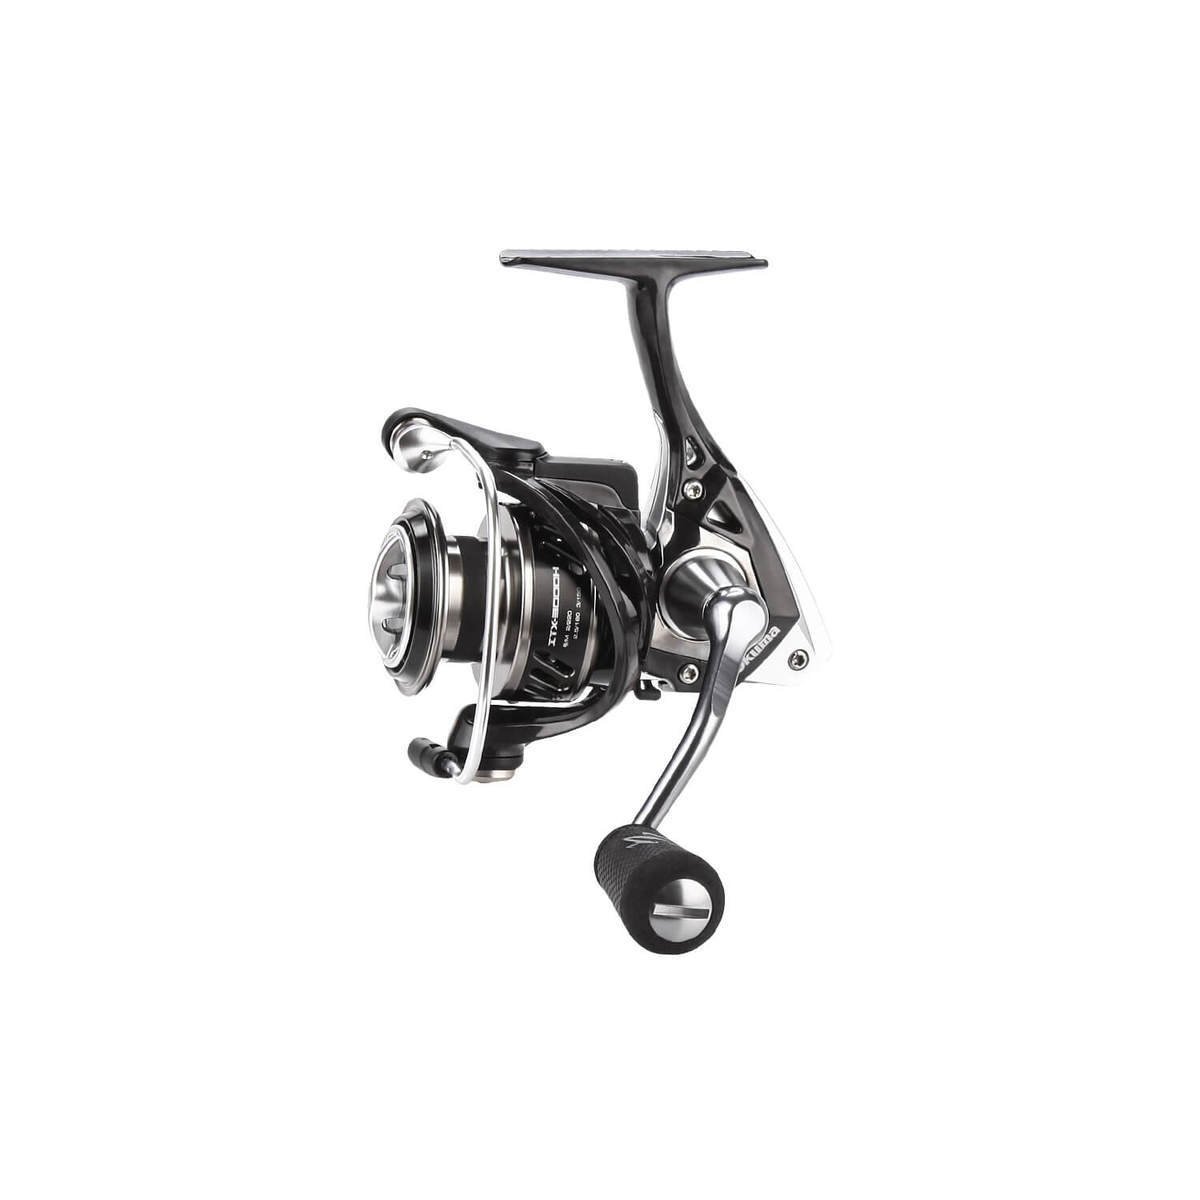 Okuma Aria 1000 Spinning Fishing Reel a Series in Clam Pack 